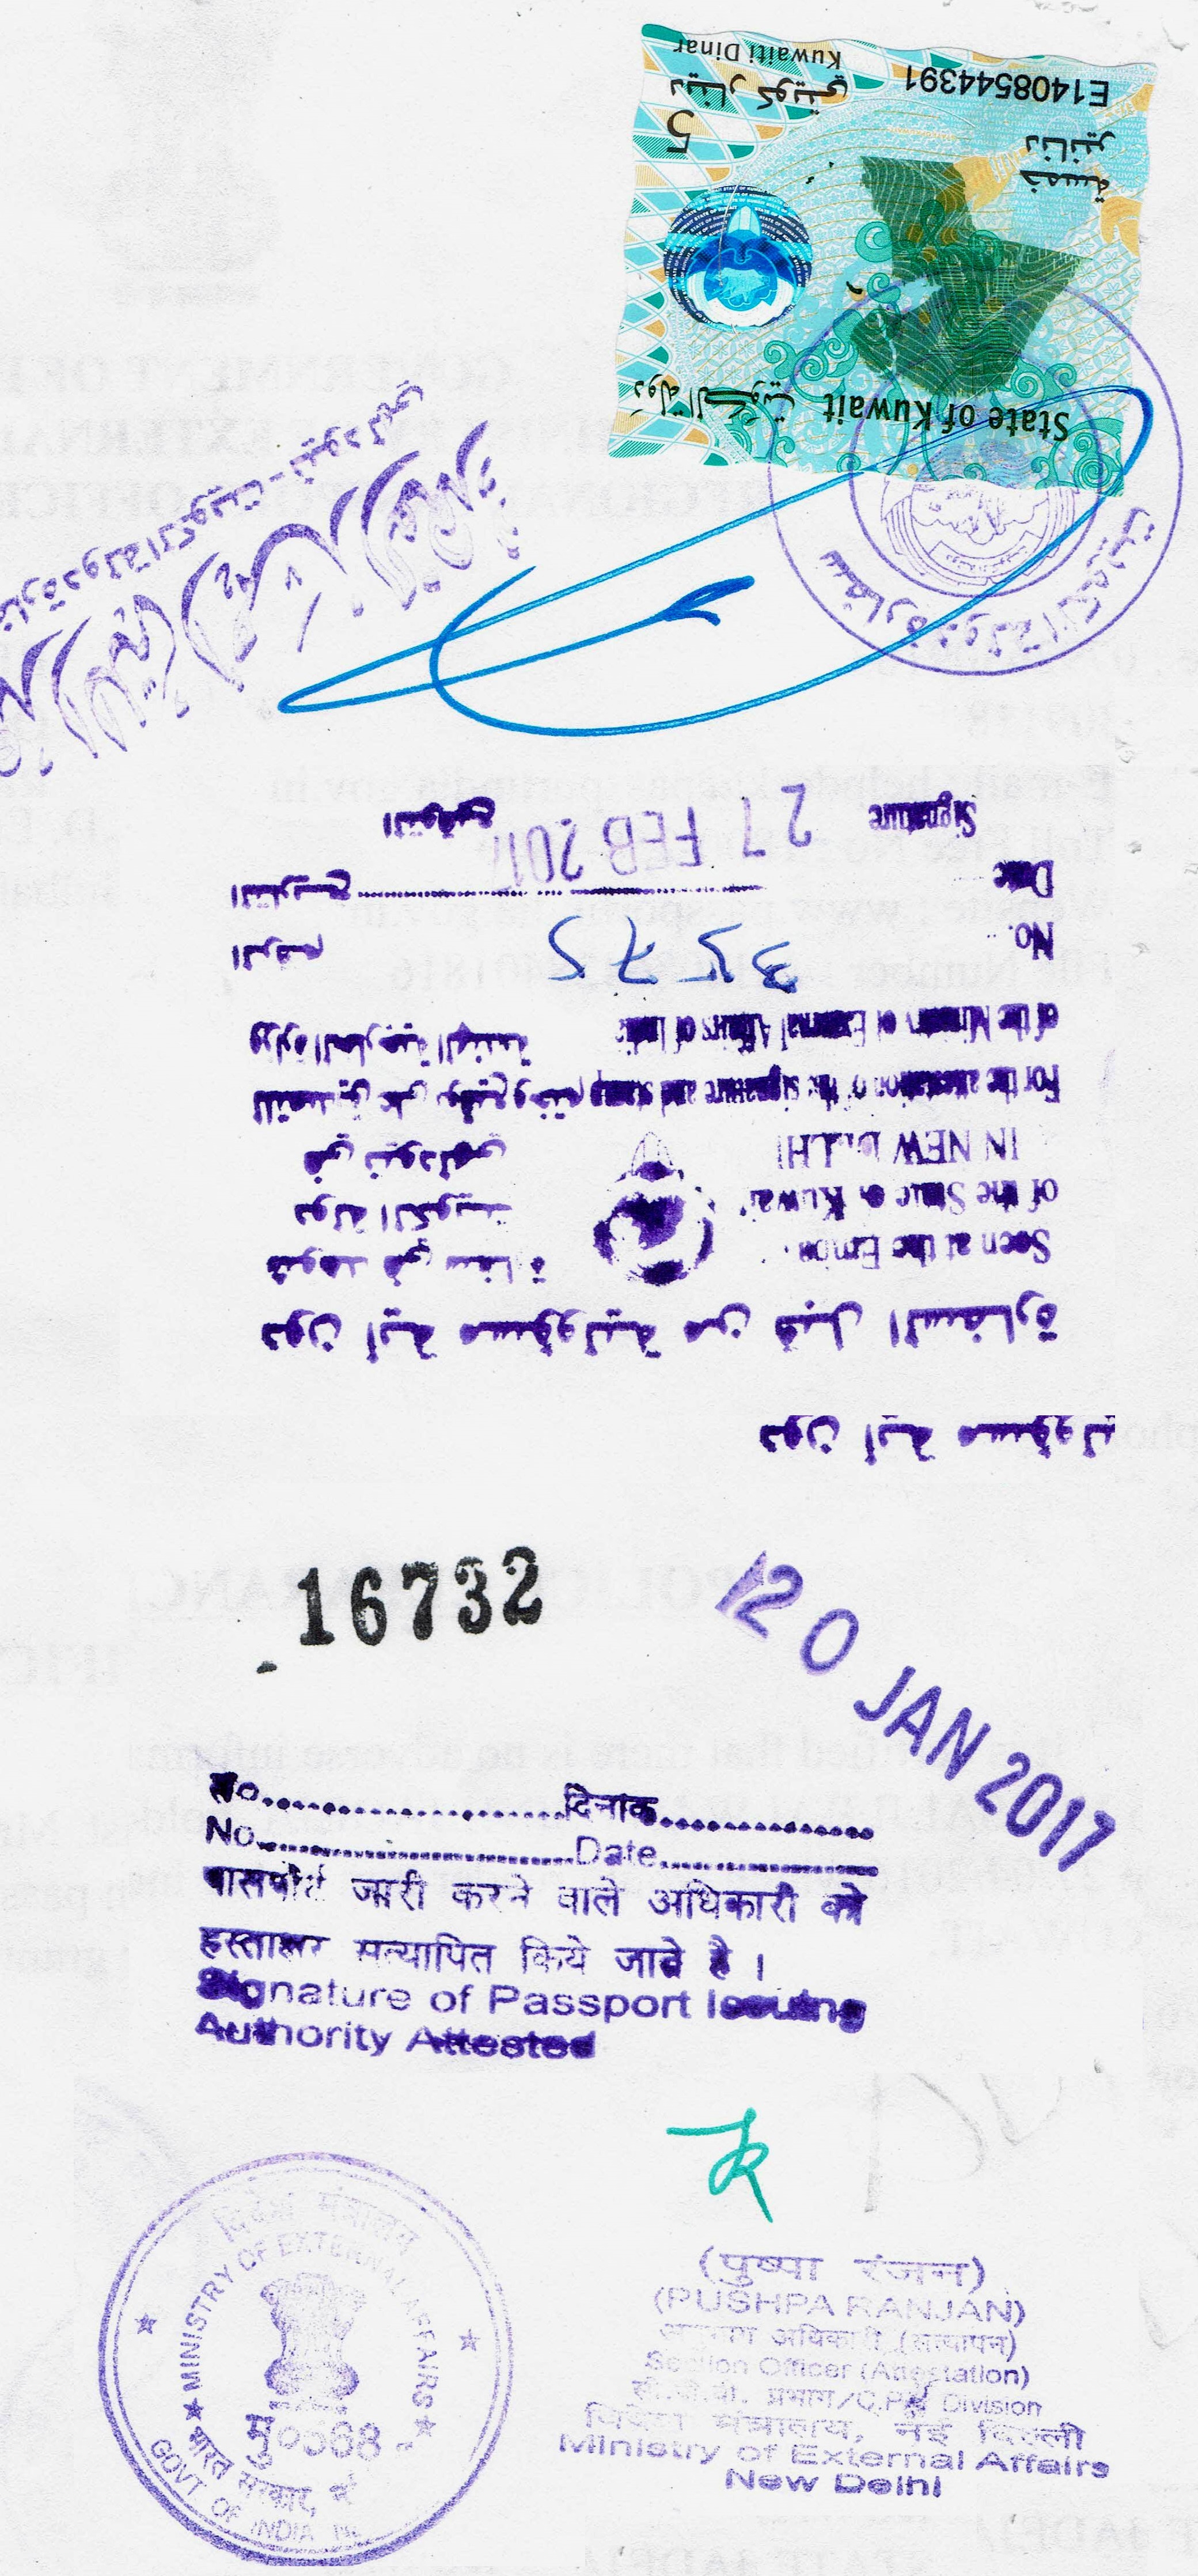 What is the process of Birth Certificate Attestation